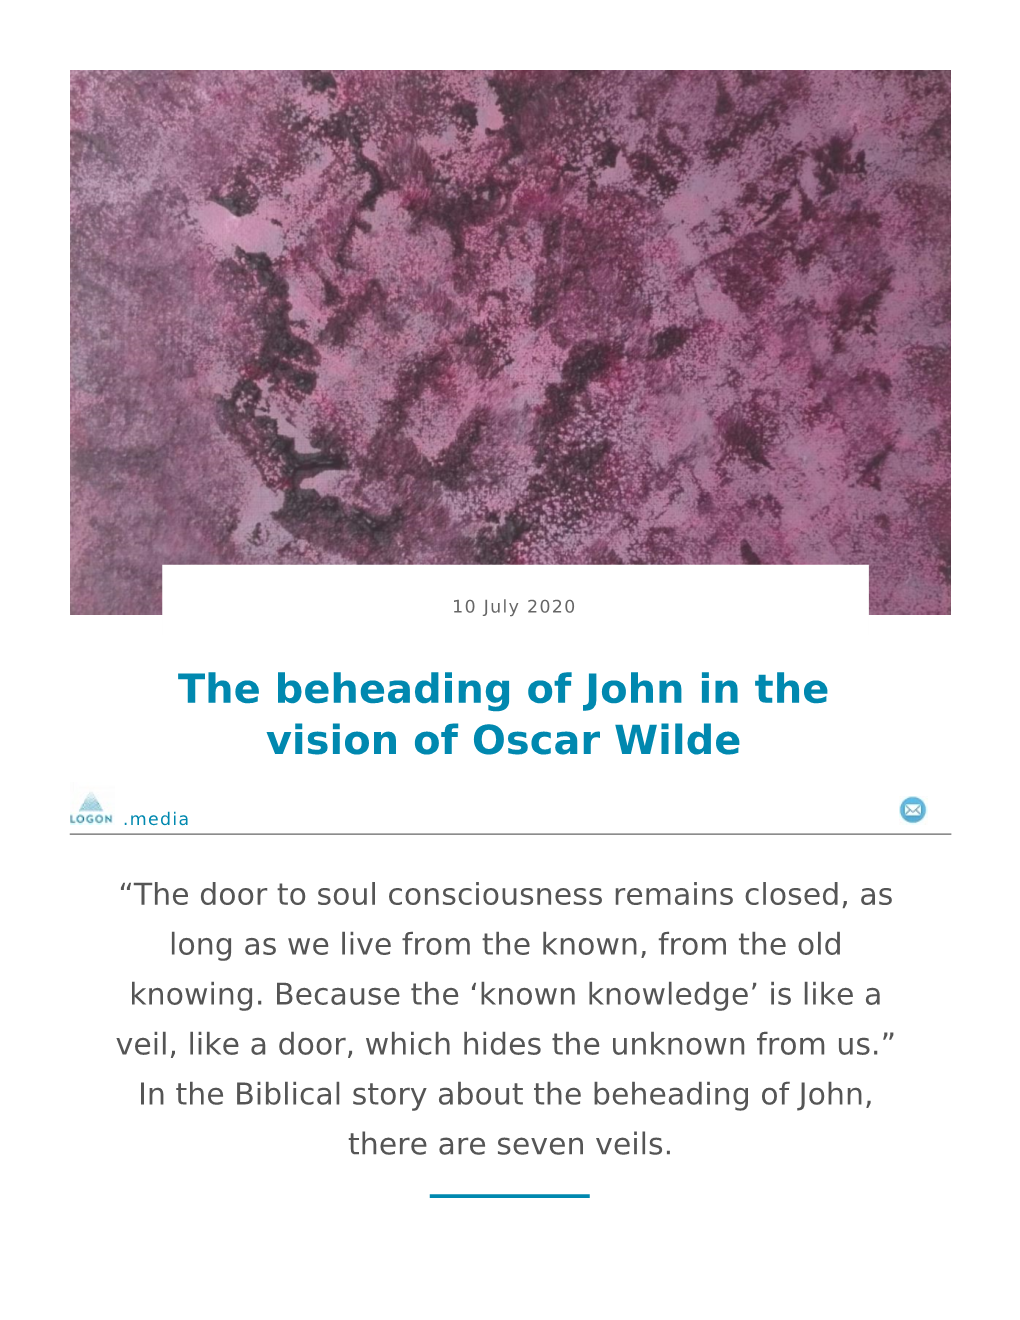 The Beheading of John in the Vision of Oscar Wilde